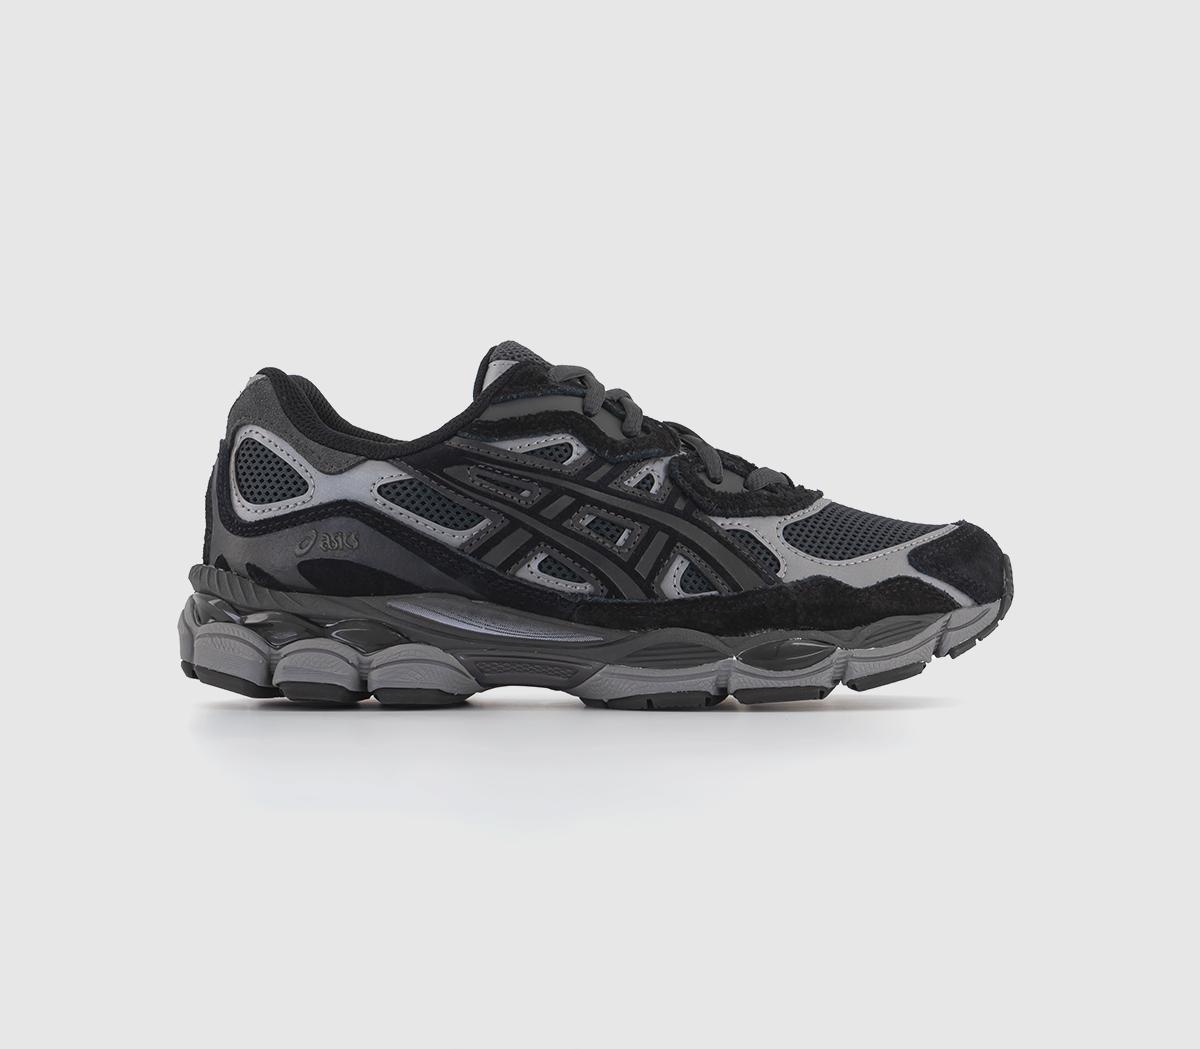 ASICS Gel Nyc Trainers Graphite Grey Black - Men's Trainers